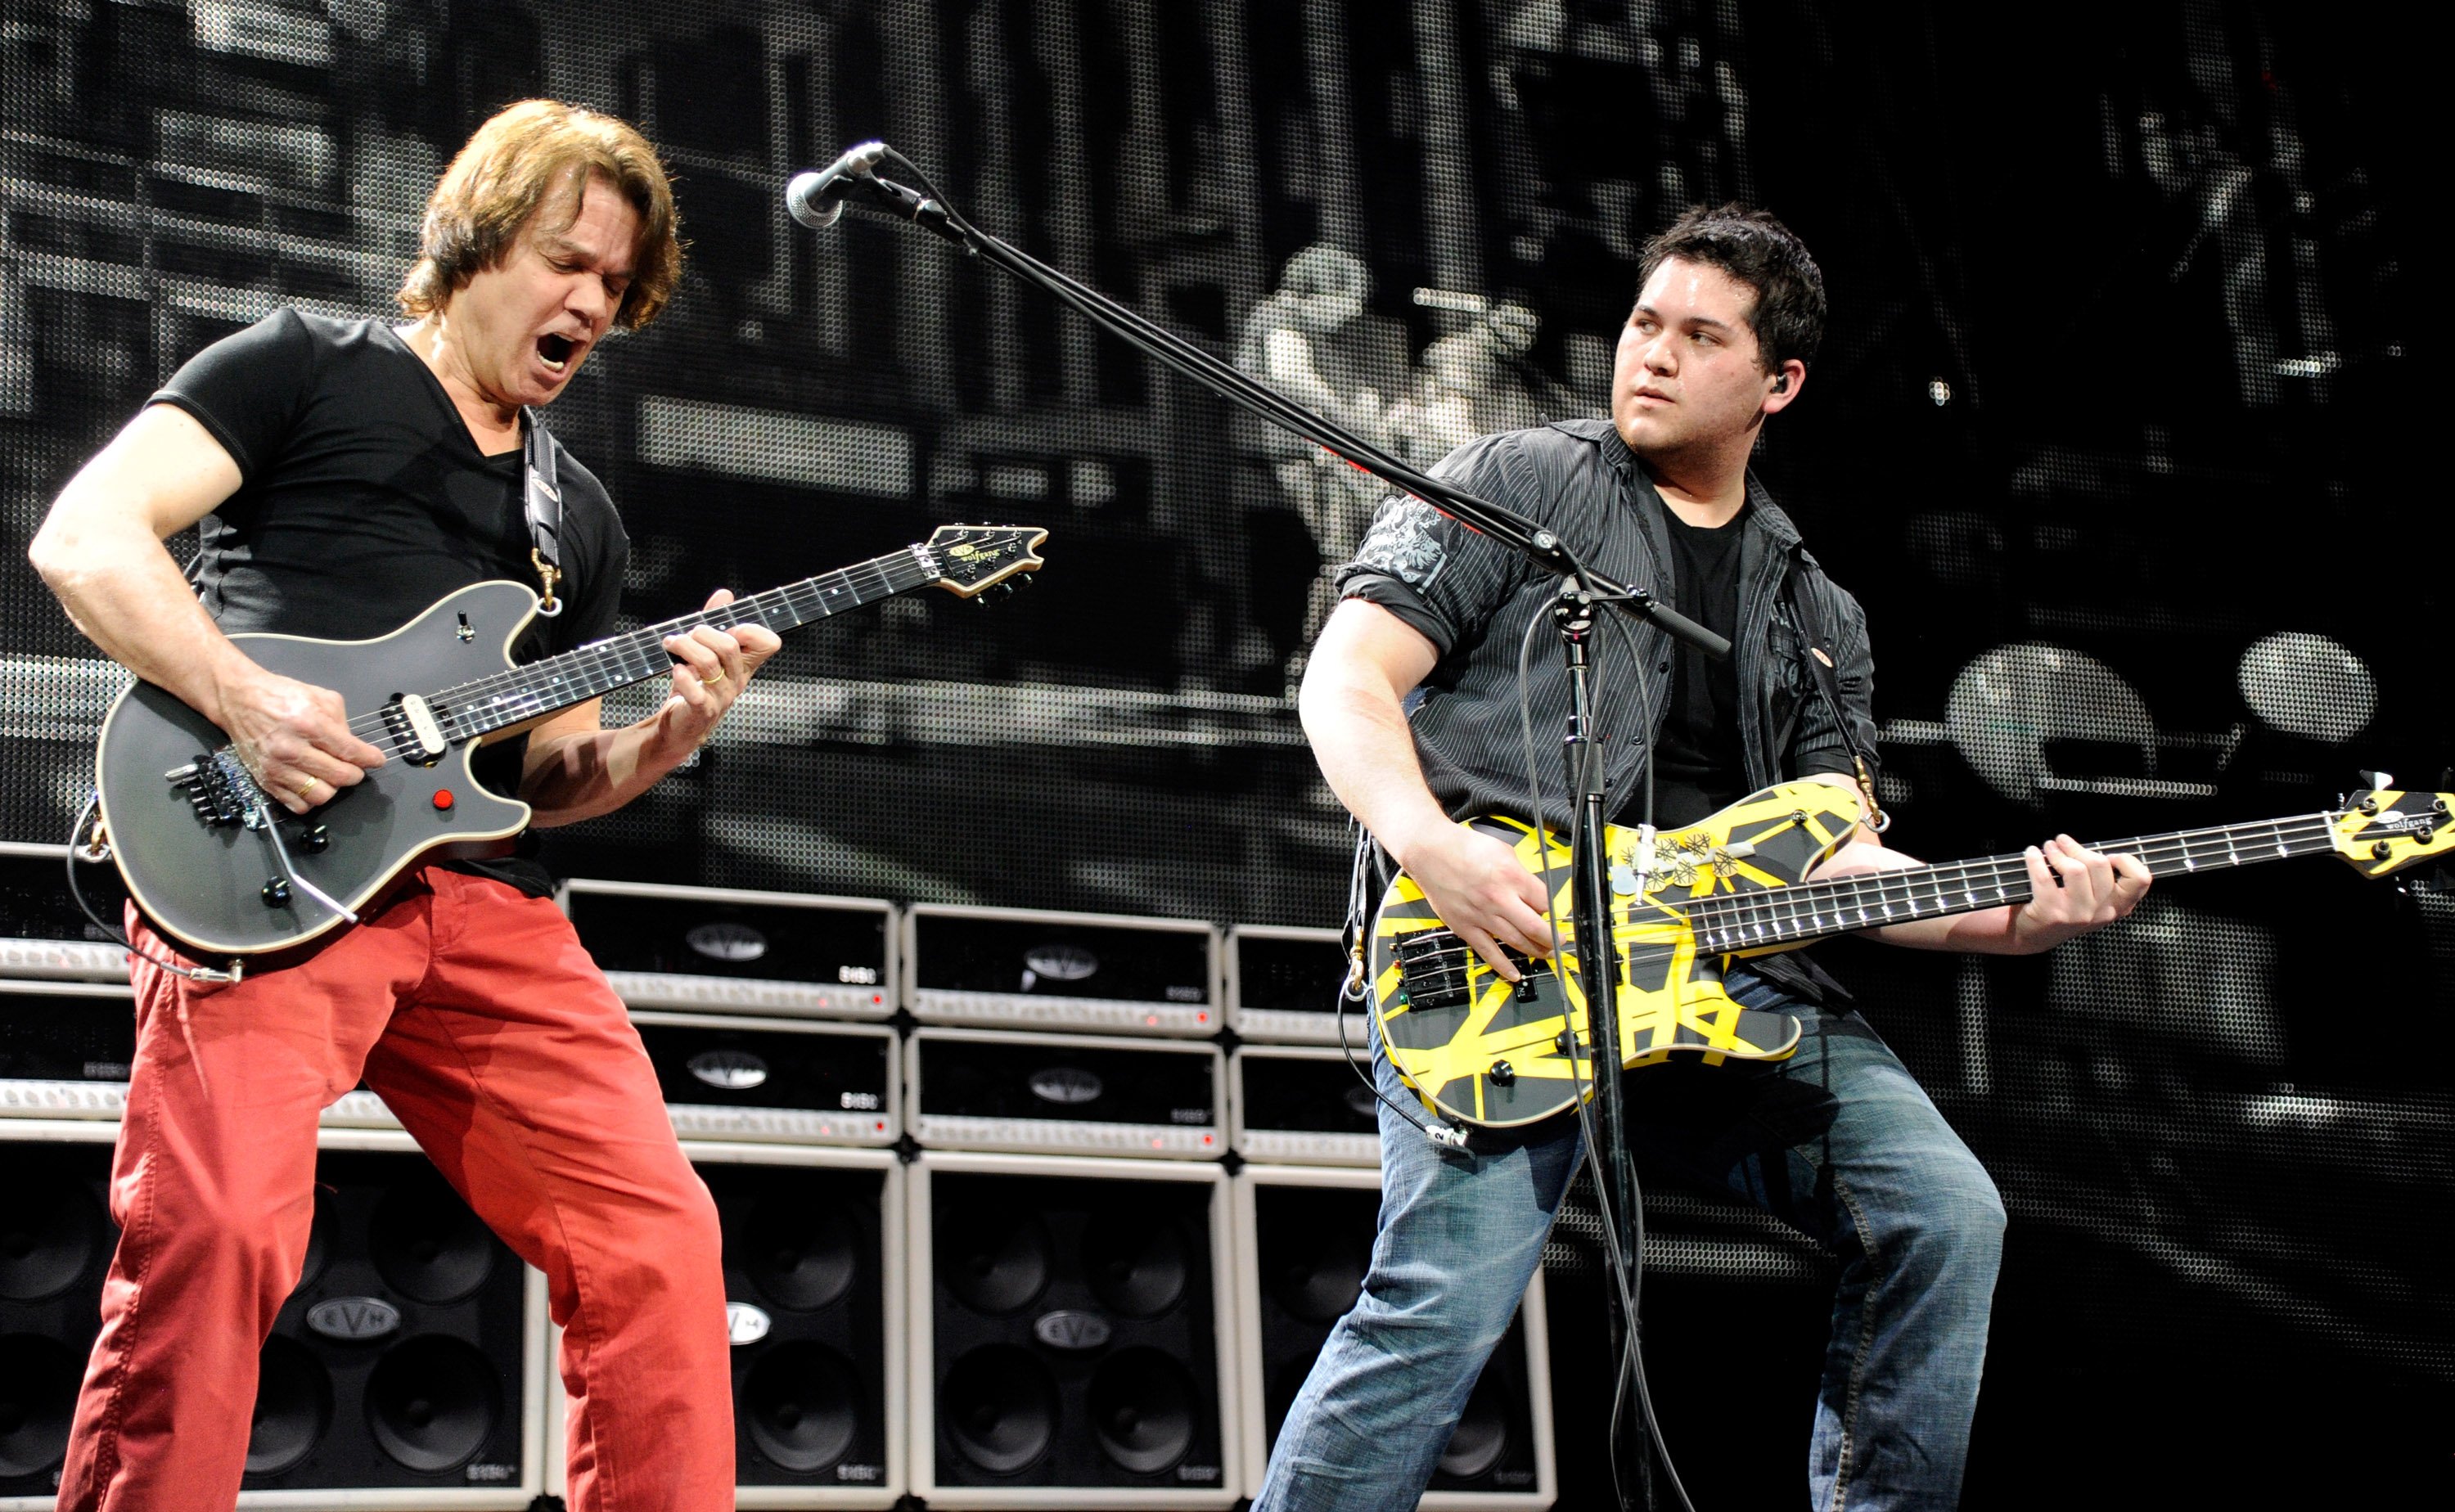 Eddie Van Halen and Wolfgang Van Halen of Van Halen perform during "A Different Kind of Truth" tour at Madison Square Garden on February 28, 2012, in New York City. | Source: Getty Images